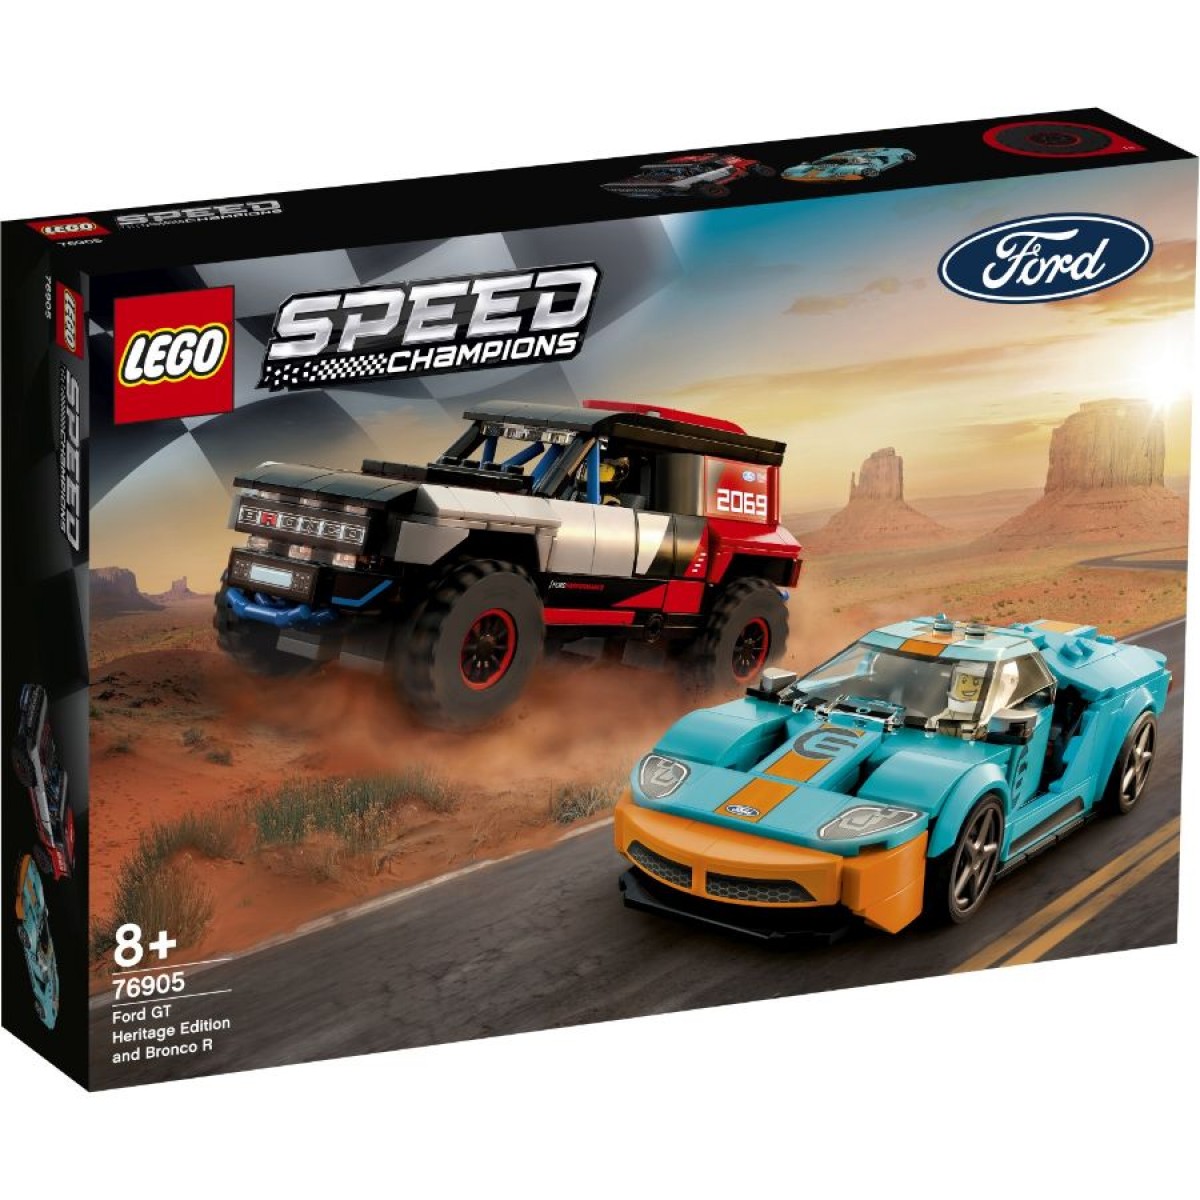 LEGO Speed Champions Ford GT Heritage Edition & Bronco R Toy Brands L